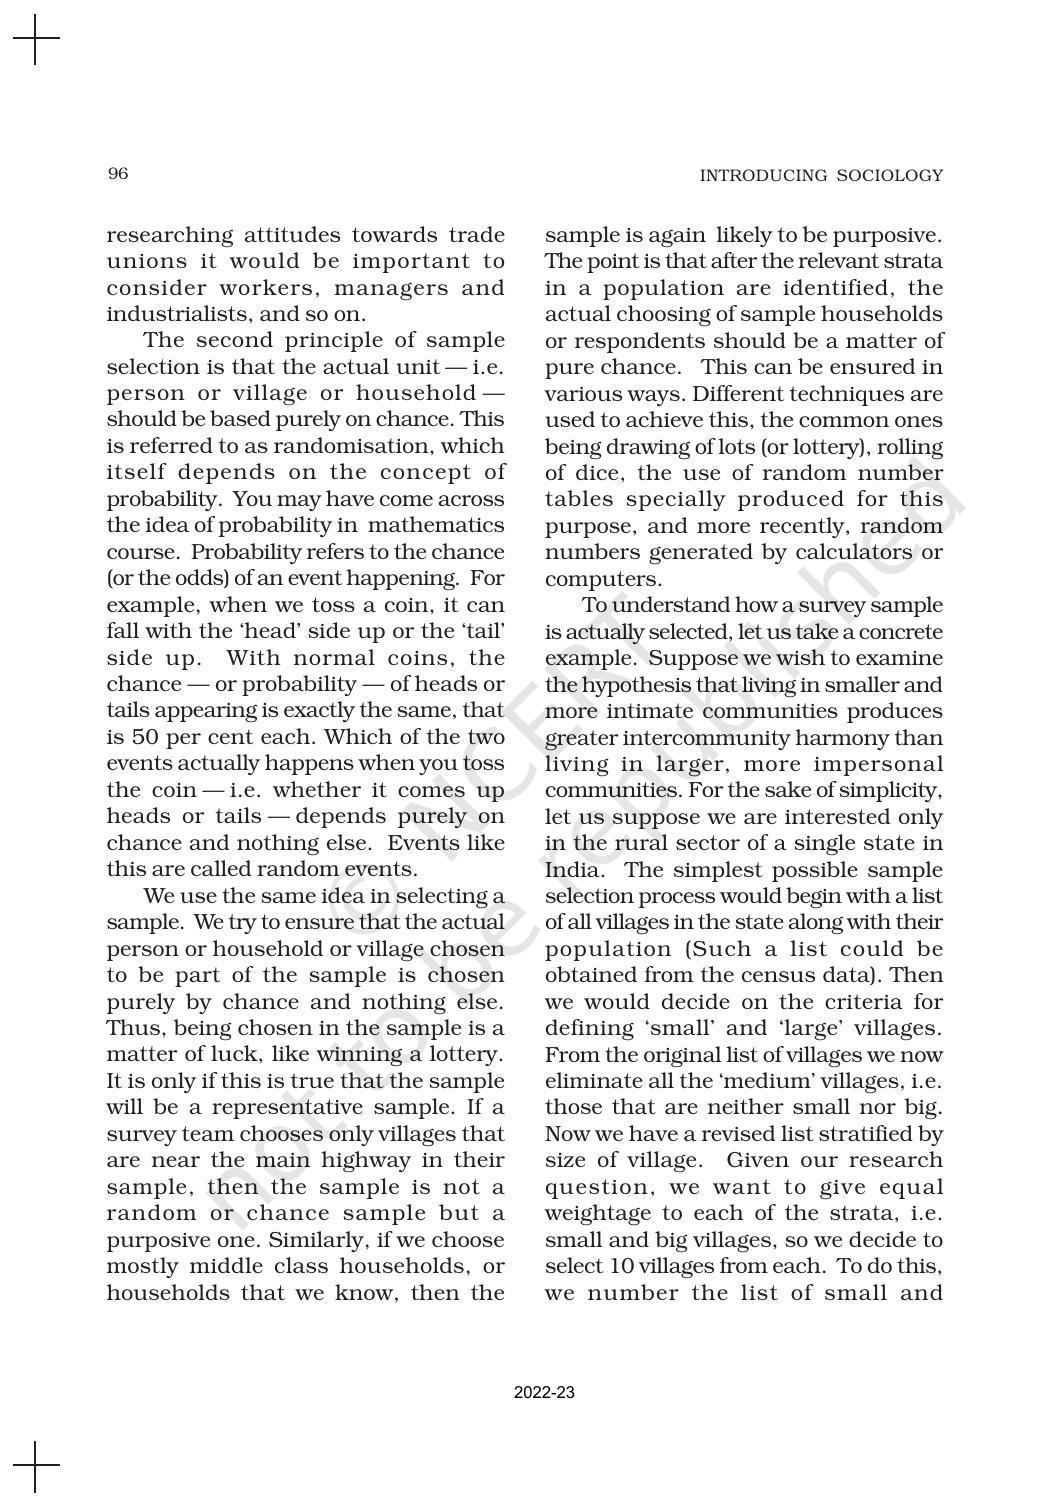 NCERT Book for Class 11 Sociology (Part-I) Chapter 5 Doing Sociology: Research Methods - Page 15